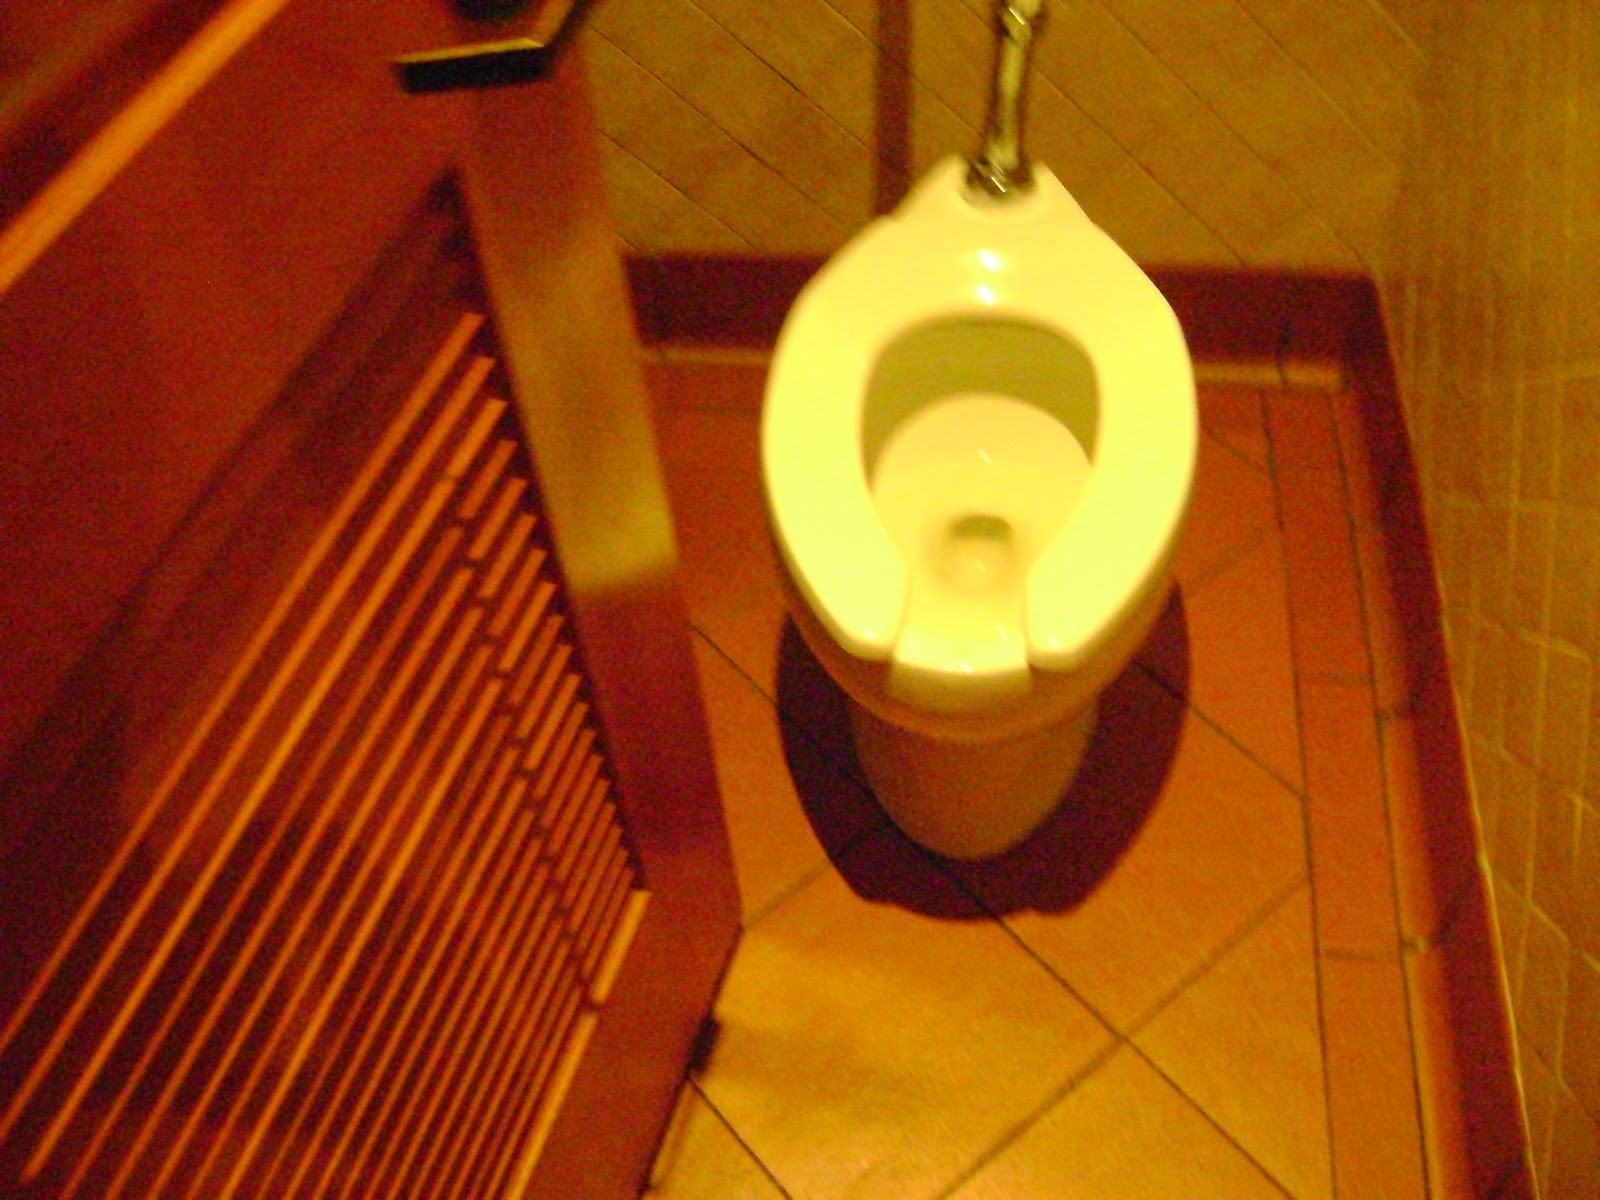 The Water Closet Olive Garden Tynsgboro Ma When You Re Here